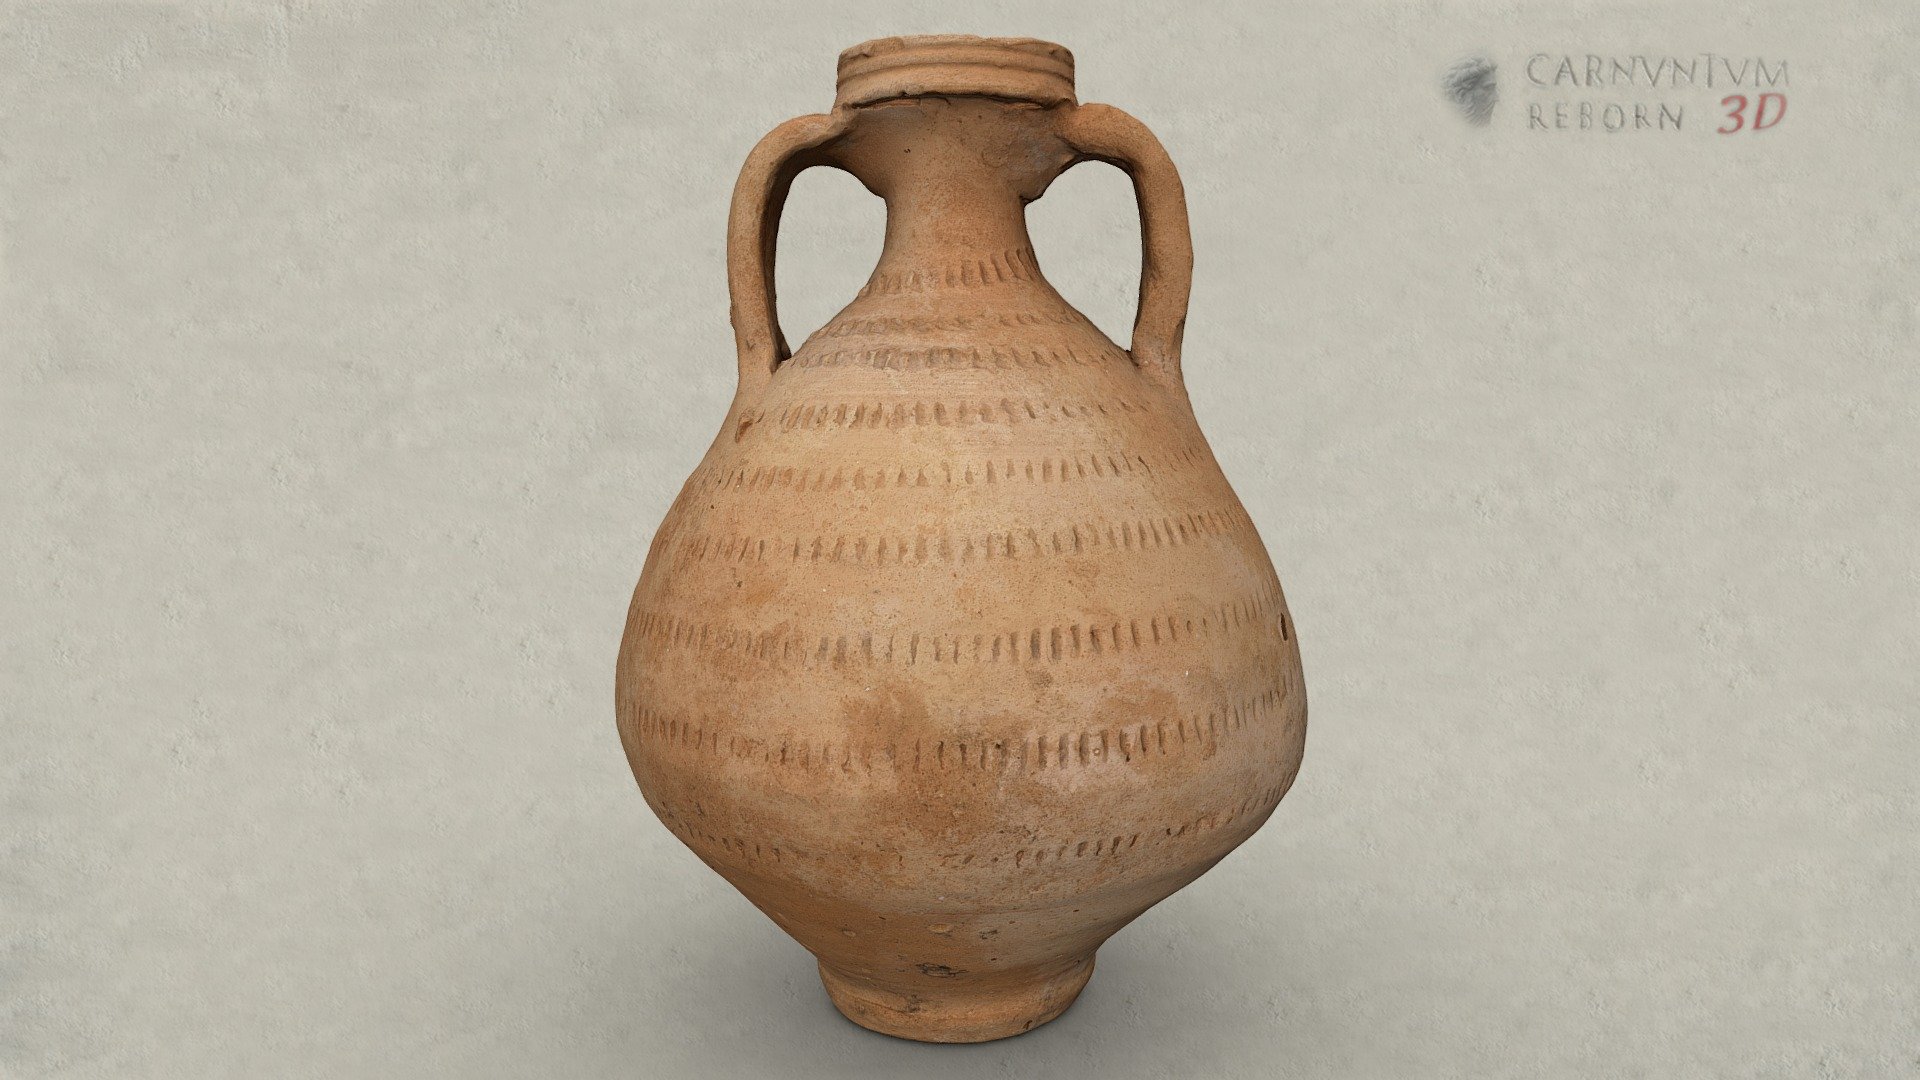 Bellied two-handled Roman jug with vertical outer grooved rim. The band handles sit directly under the rim and rest on the shoulder at the bottom. The outer wall is decorated with a multi-row scroll wheel decoration, the base is flat. Ceramic; h 20,6 cm; 2nd-3rd century AD.

Model: © Landessammlungen Niederösterreich, Niederösterreich 3D - Krug - 3D model by noe-3d.at (@www.noe-3d.at) 3d model